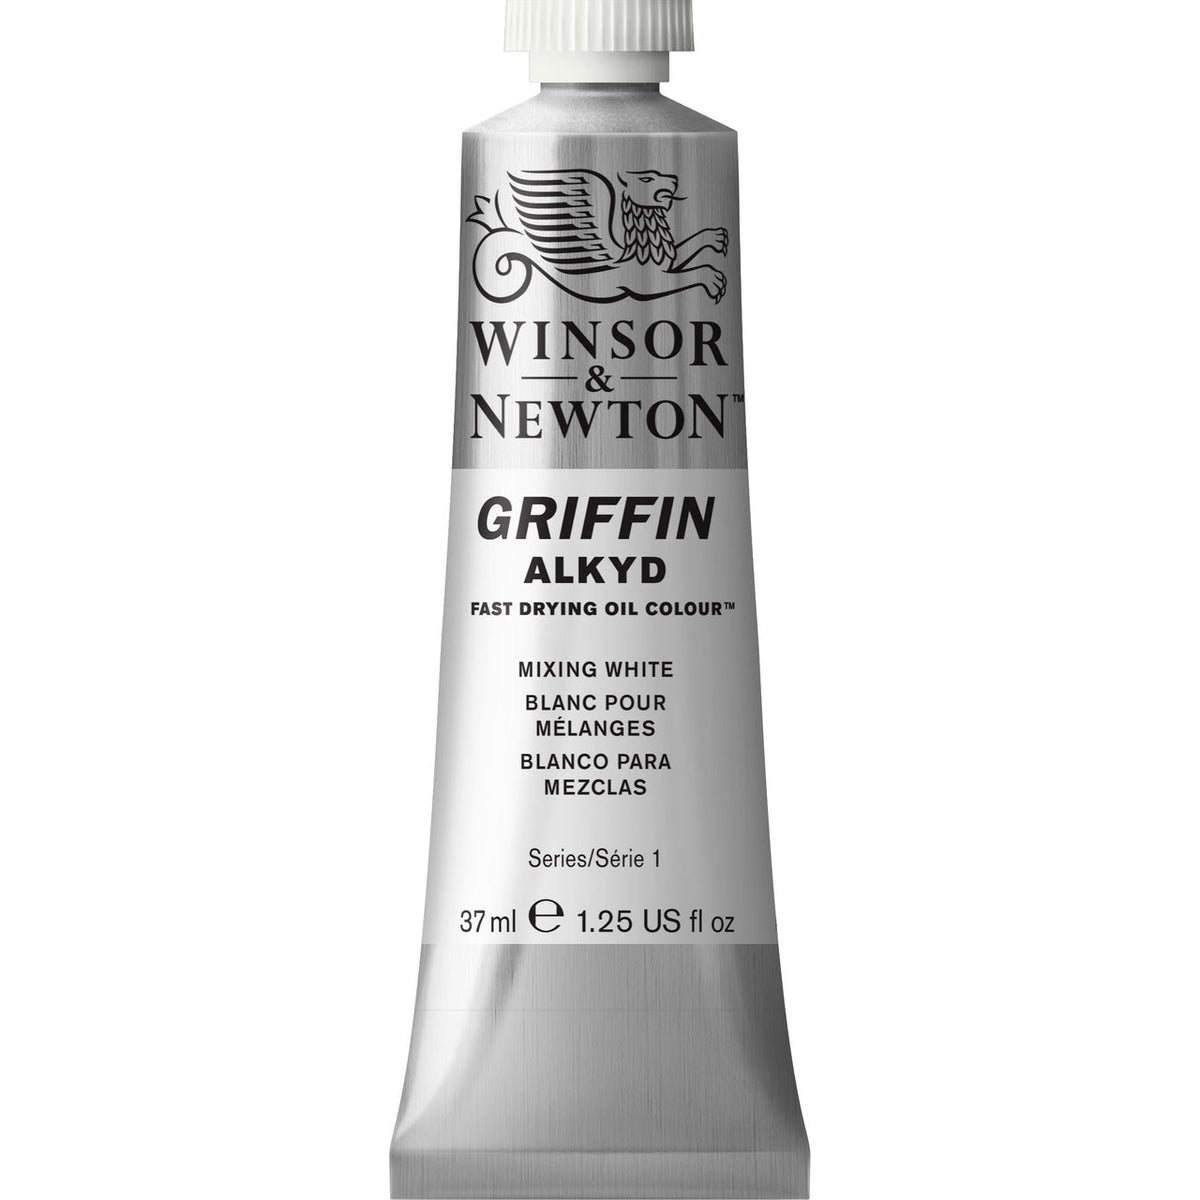 Winsor & Newton Griffin Alkyd 37ml Mixing White - merriartist.com